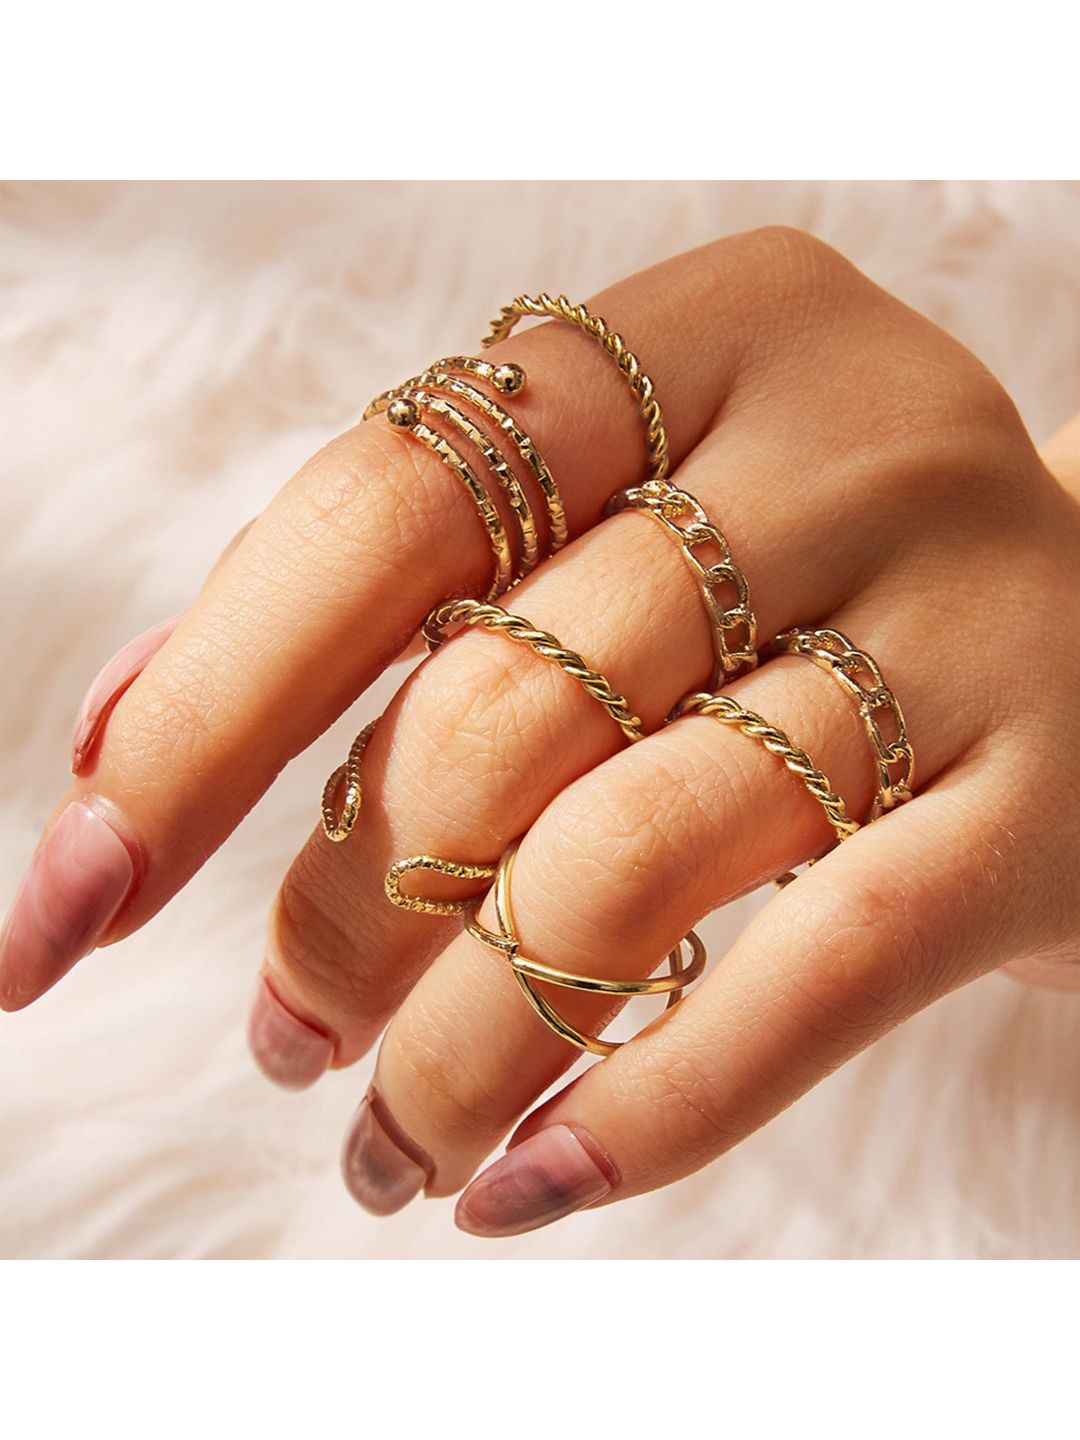 Vembley Set Of 8 Oxidised Gold-Plated Adjustable Finger Rings Price in India